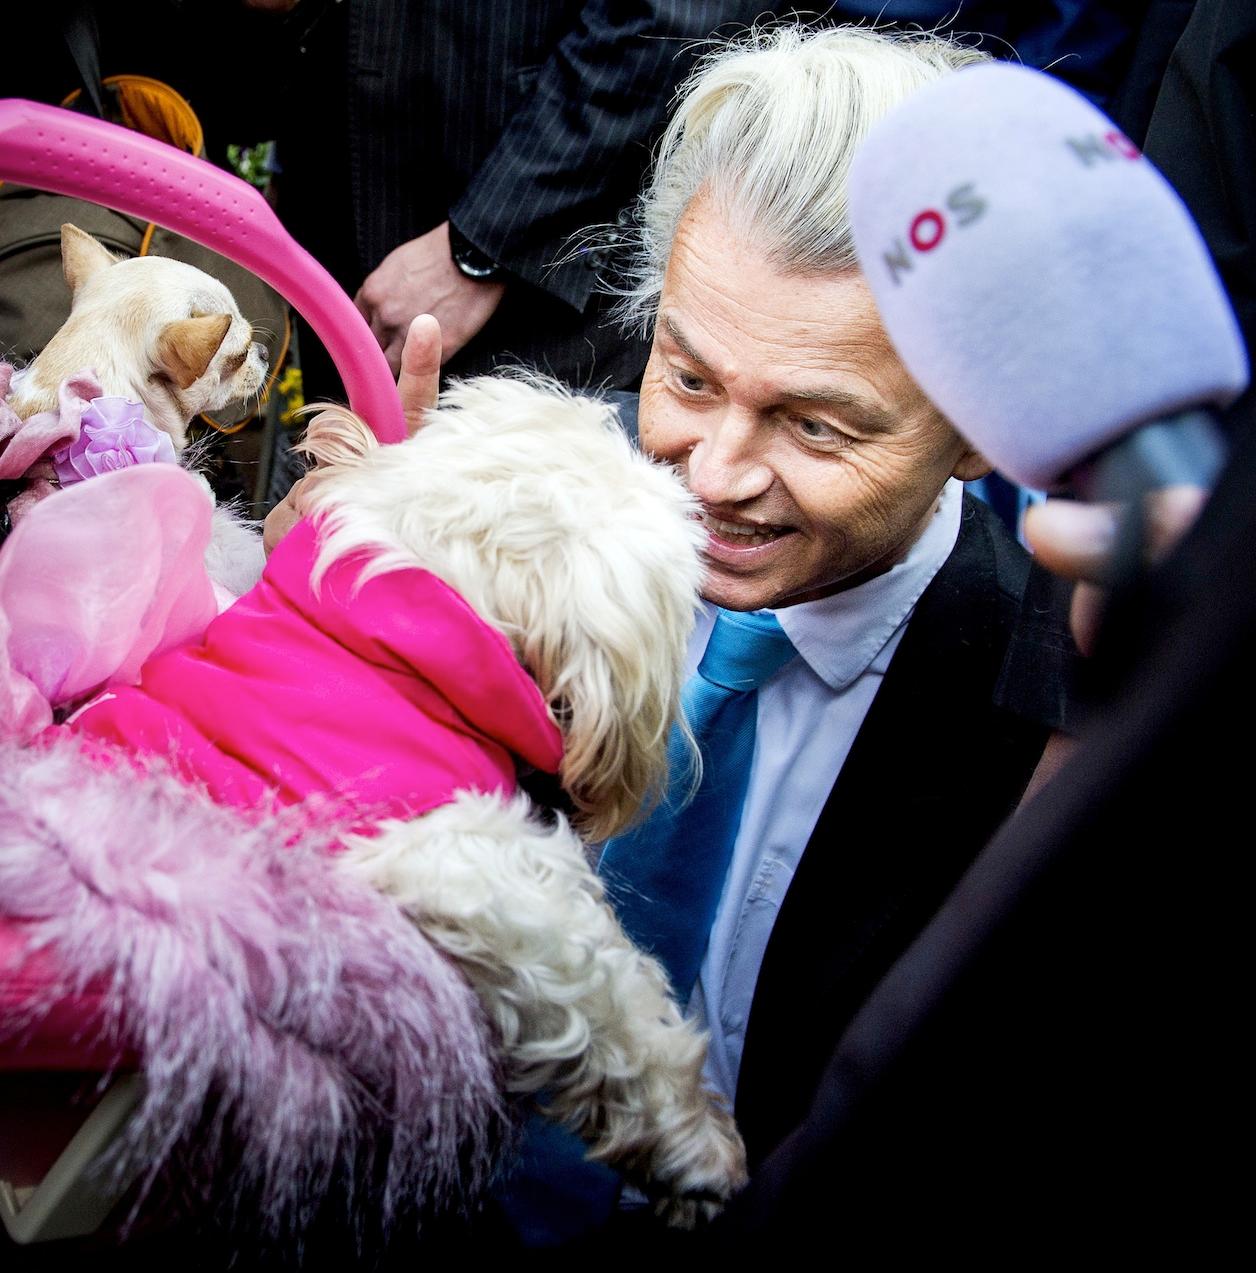 In this 2014 photo, leader of the Party for Freedom (PVV) Geert Wilders greets a little dog at a market in The Hague during campaigning.